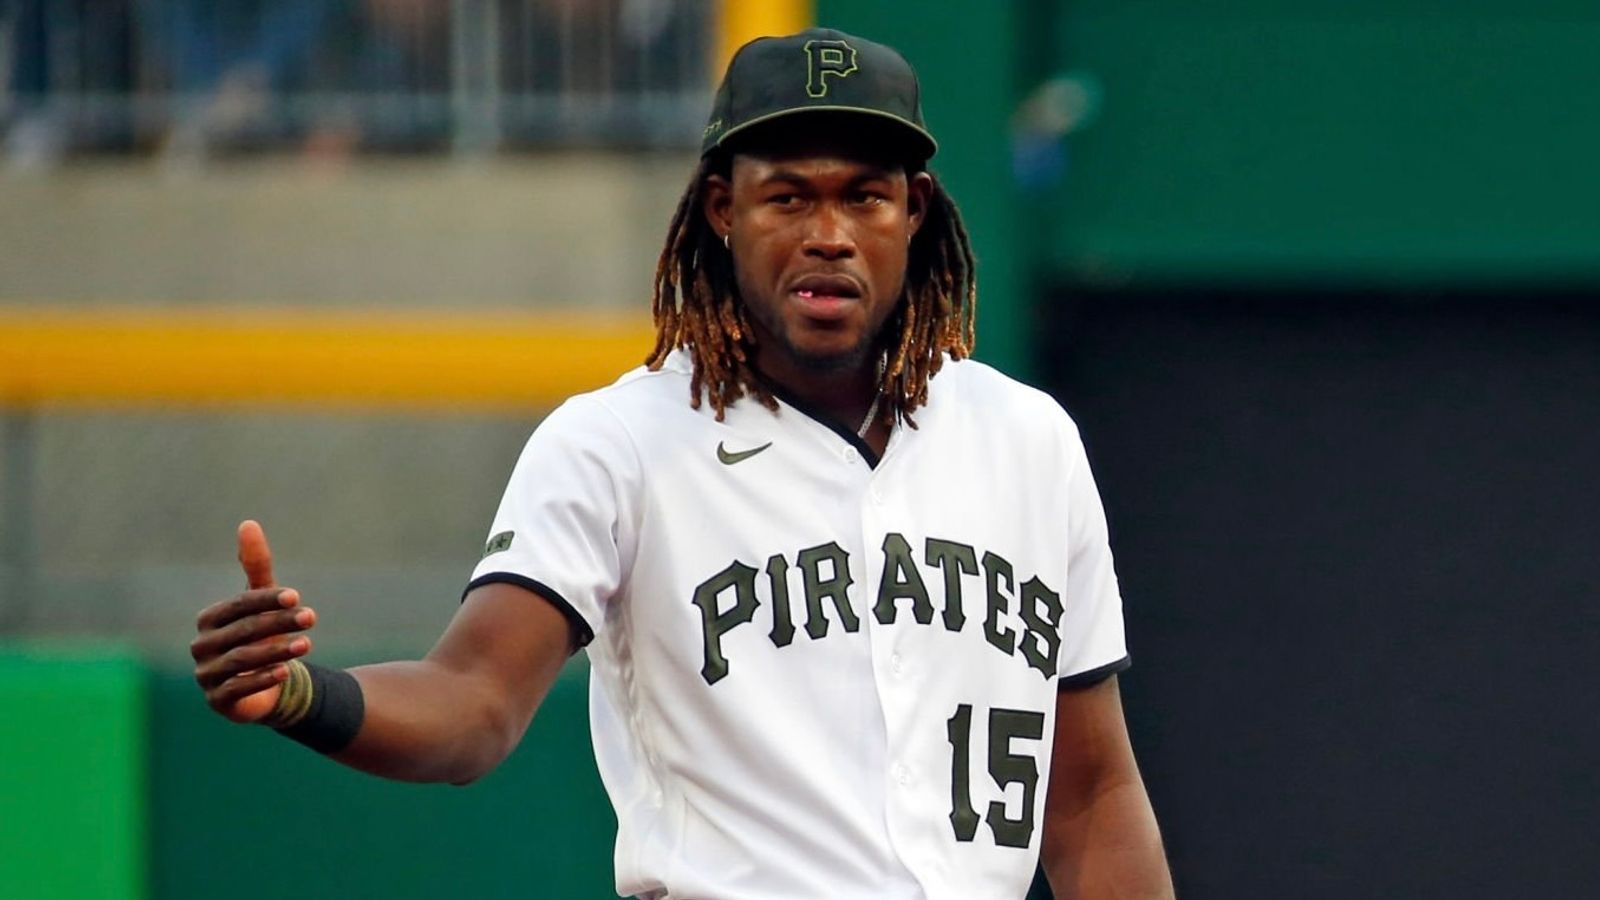 Pirates Promote Baseball's Most Exciting Prospect: Oneil Cruz